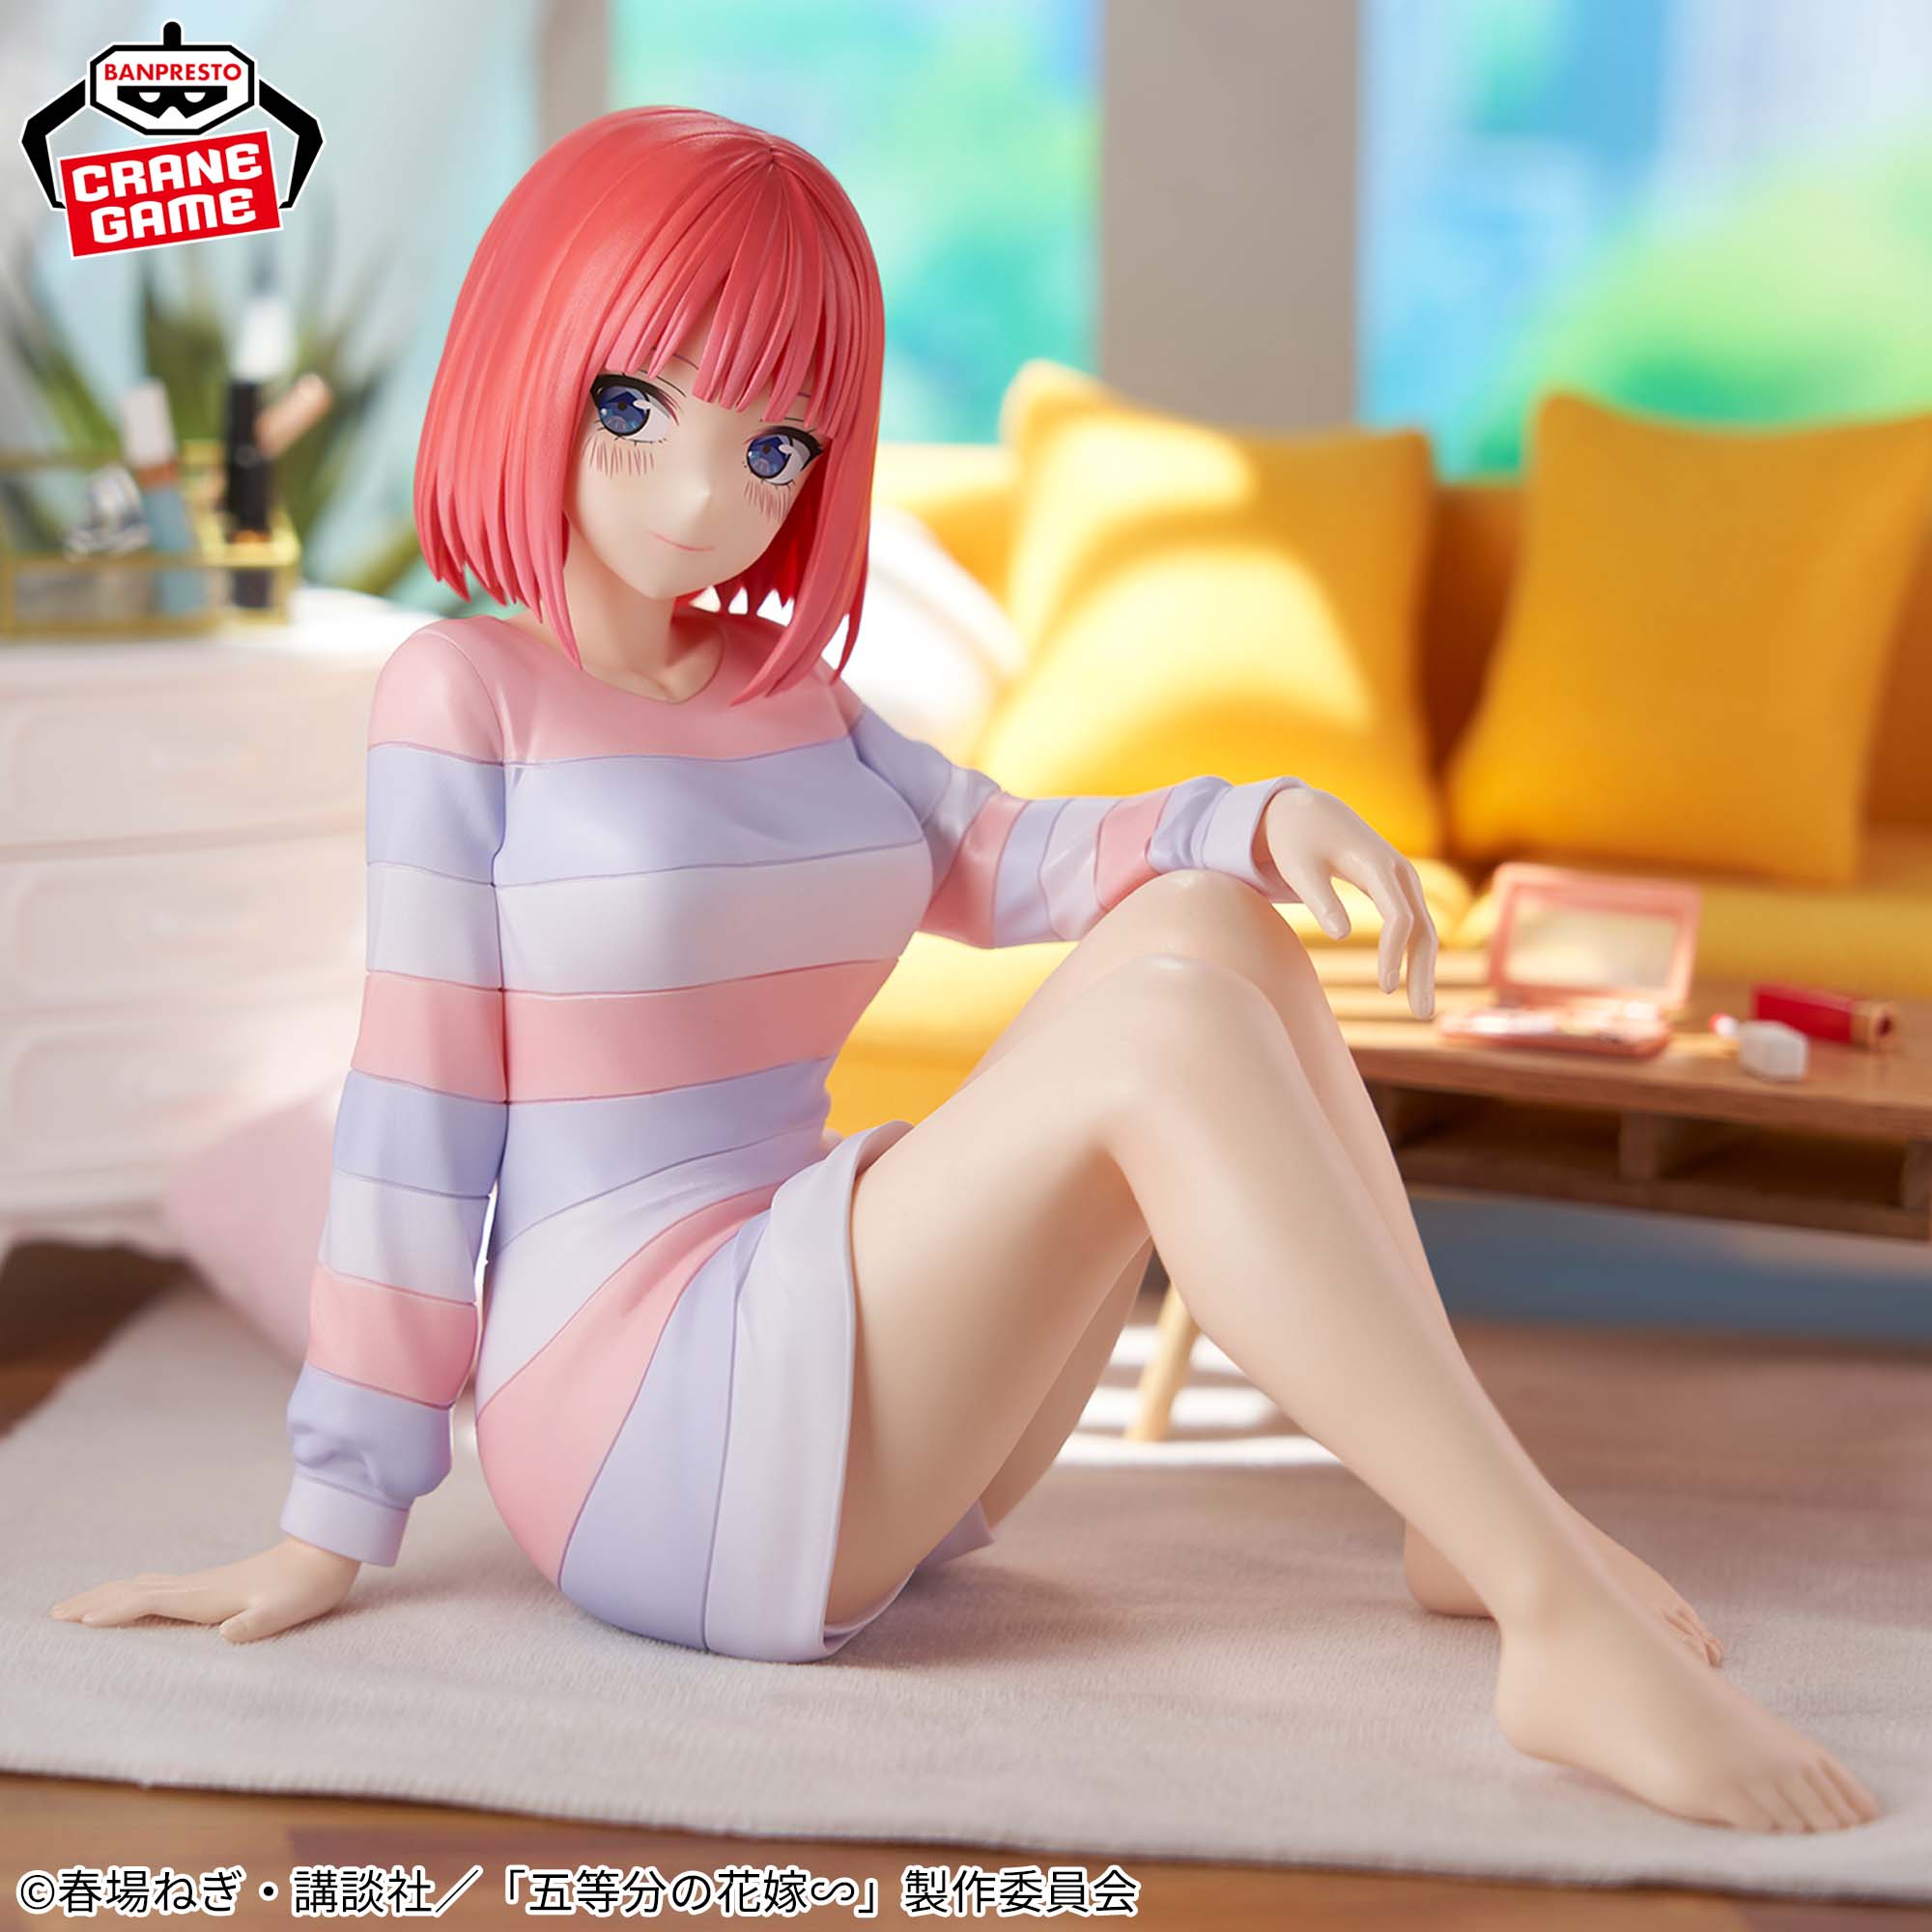 THE QUINTESSENTIAL QUINTUPLETS FIGURE - RELAX TIME - NAKANO NINO